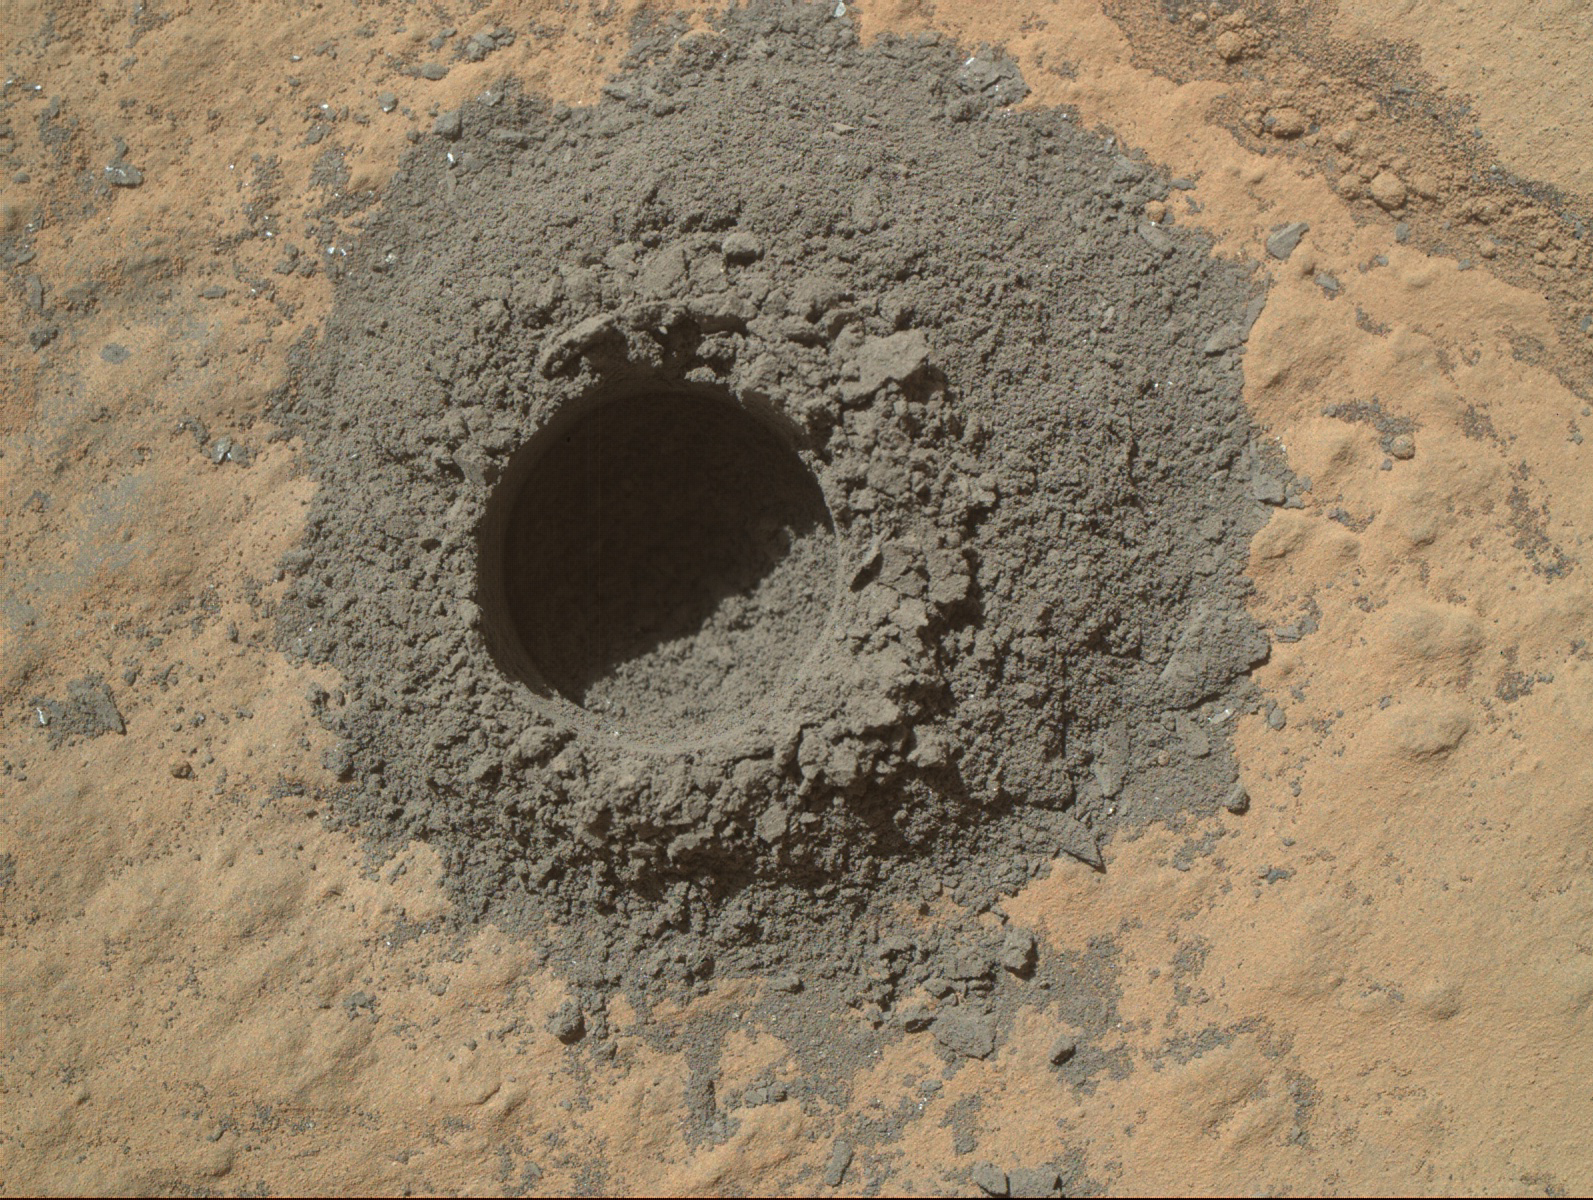 a hole in Martian rock drilled by Curiosity